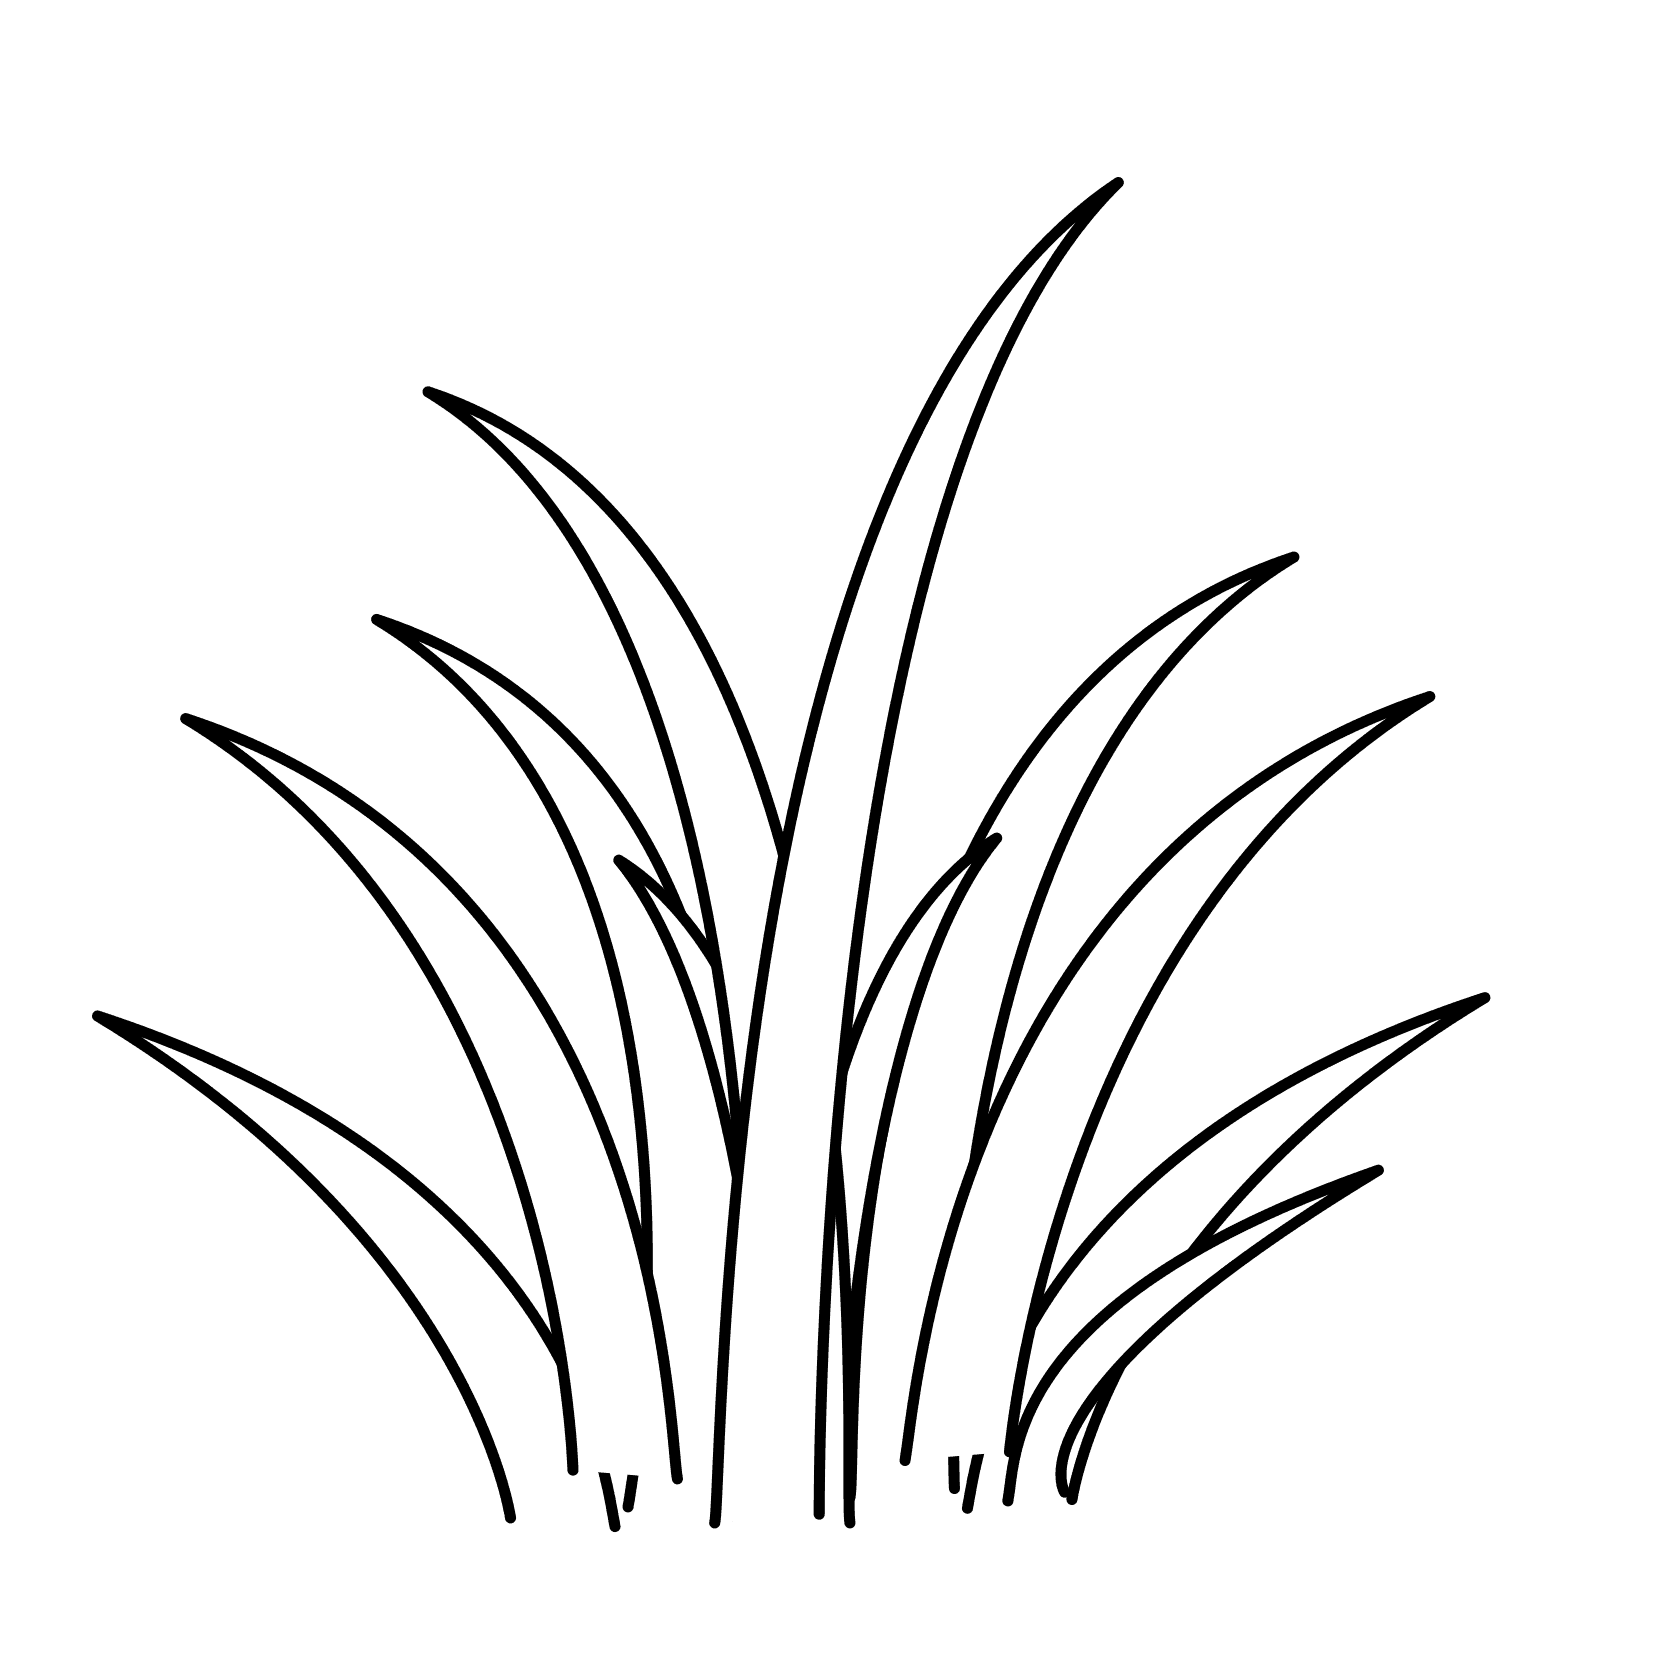 Parts Of A Plant For Kids - Free Clipart Images